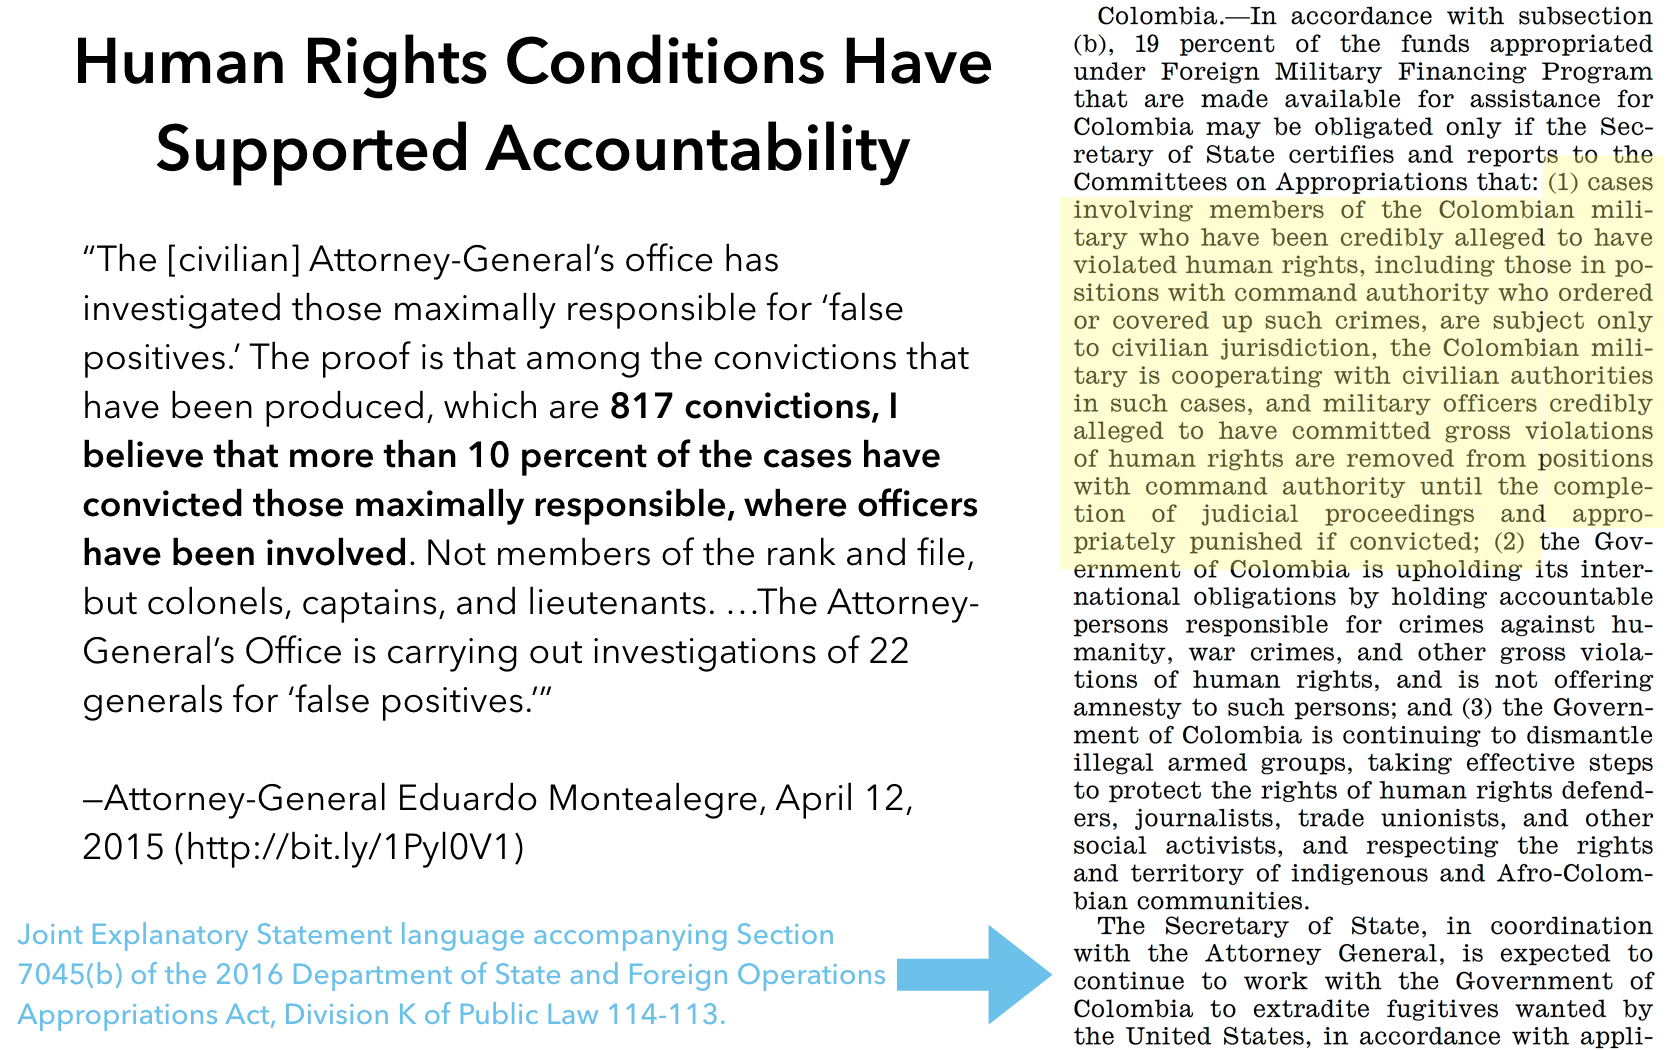 Graphic shows text of human rights conditions and suggests correlation between these and improved accountability for violations